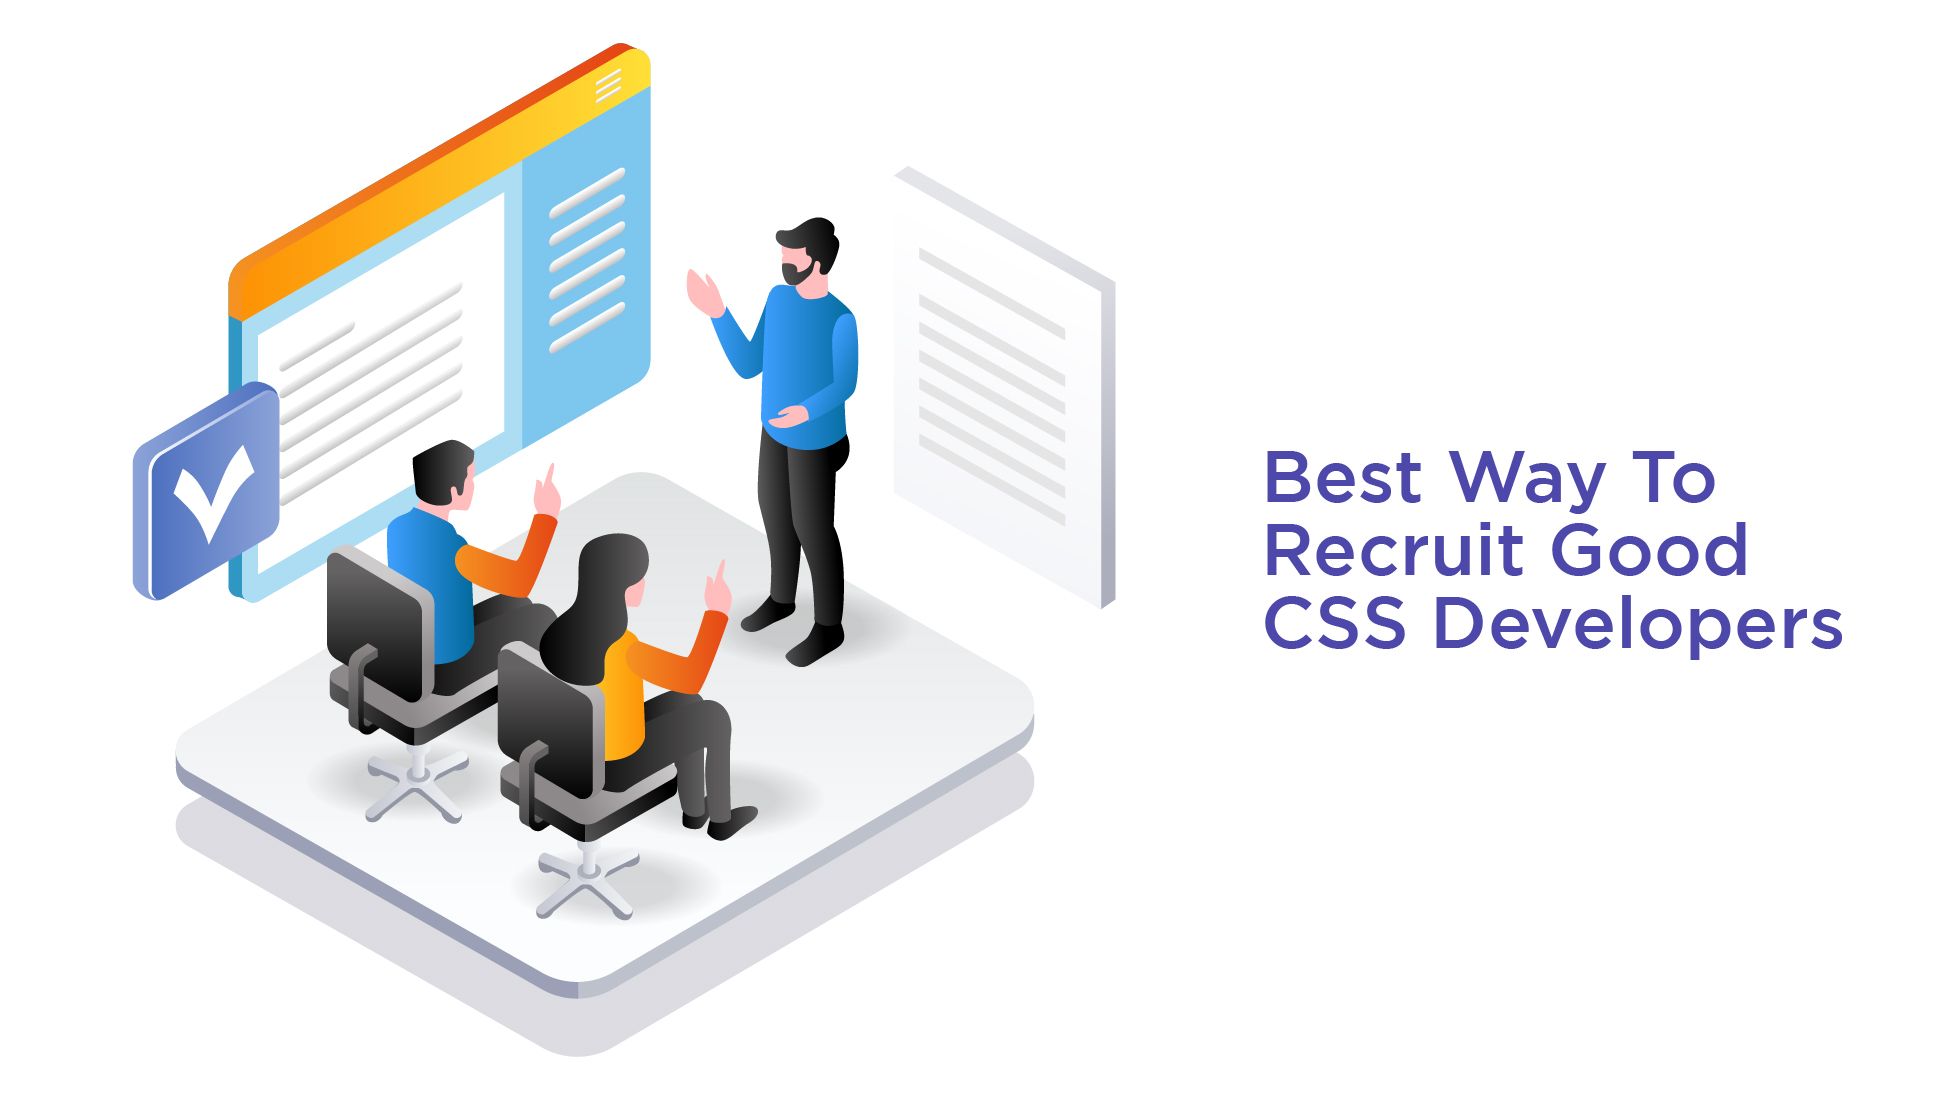 What Is The Best Way To Recruit Good CSS Developers?